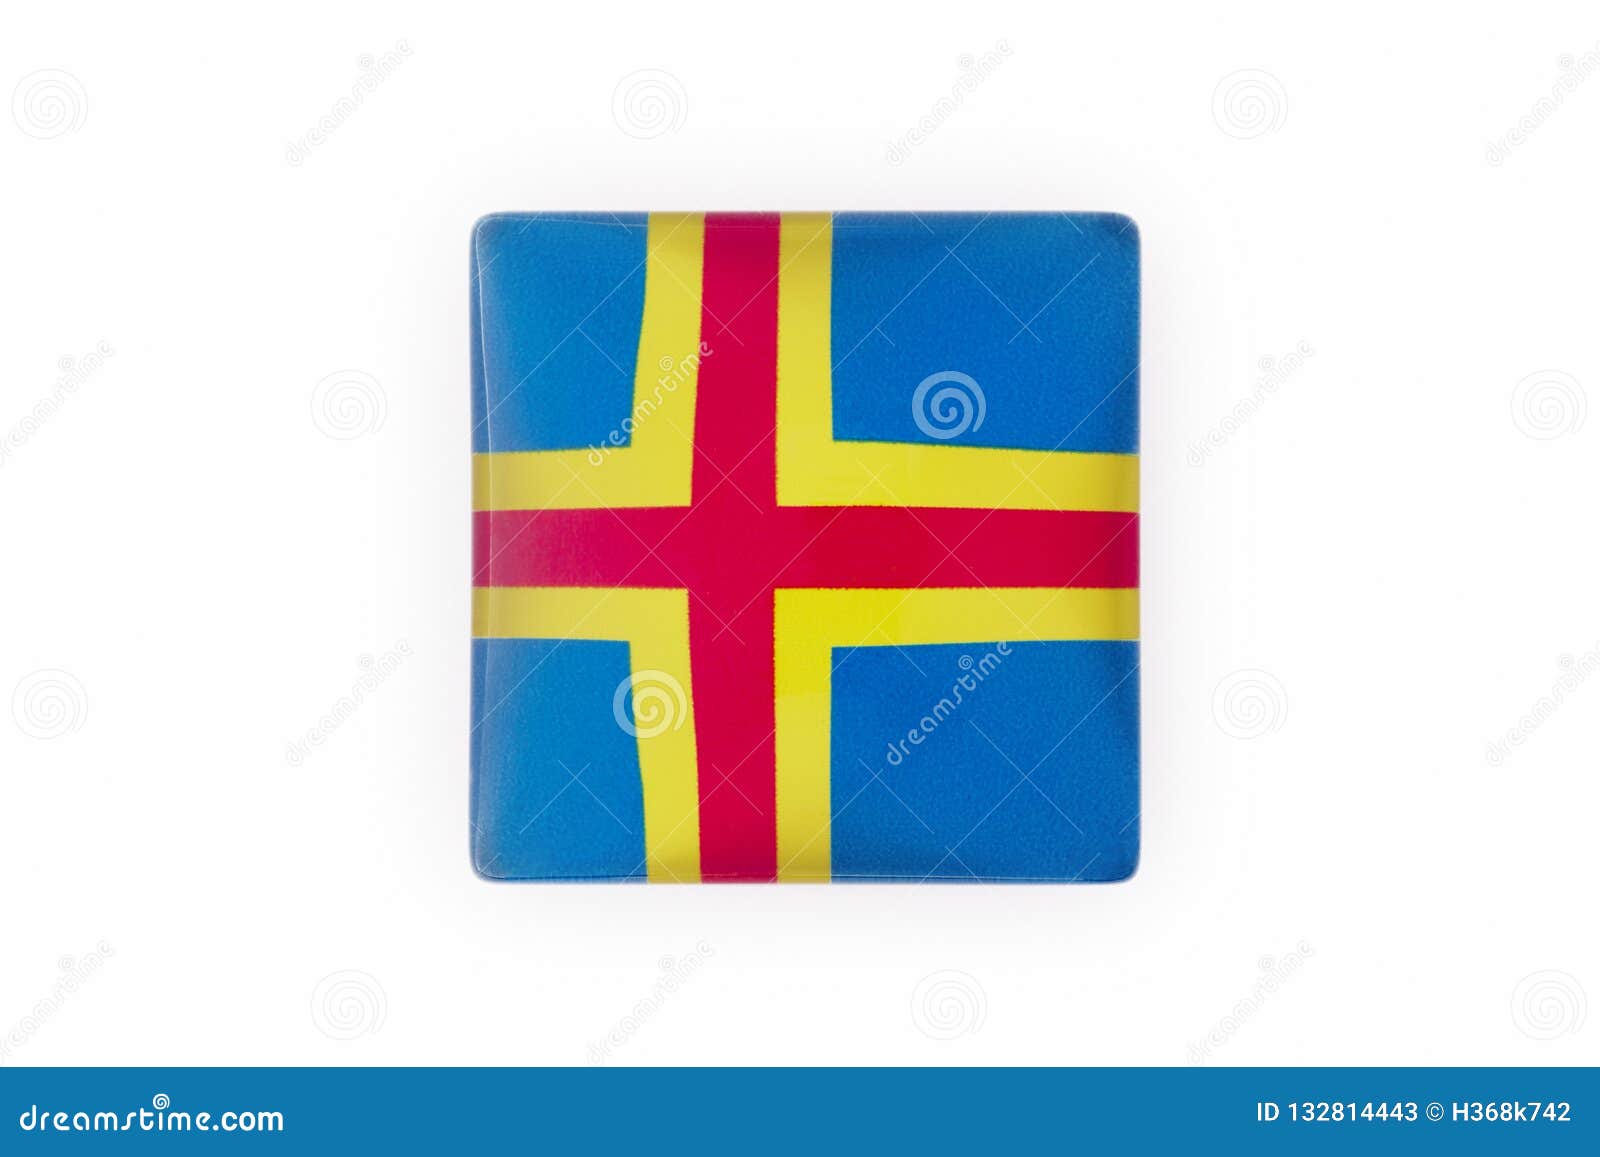 Aland Islands Magnet Flag Isolated On White Finland Heritage Stock Image Image Of National Baltic